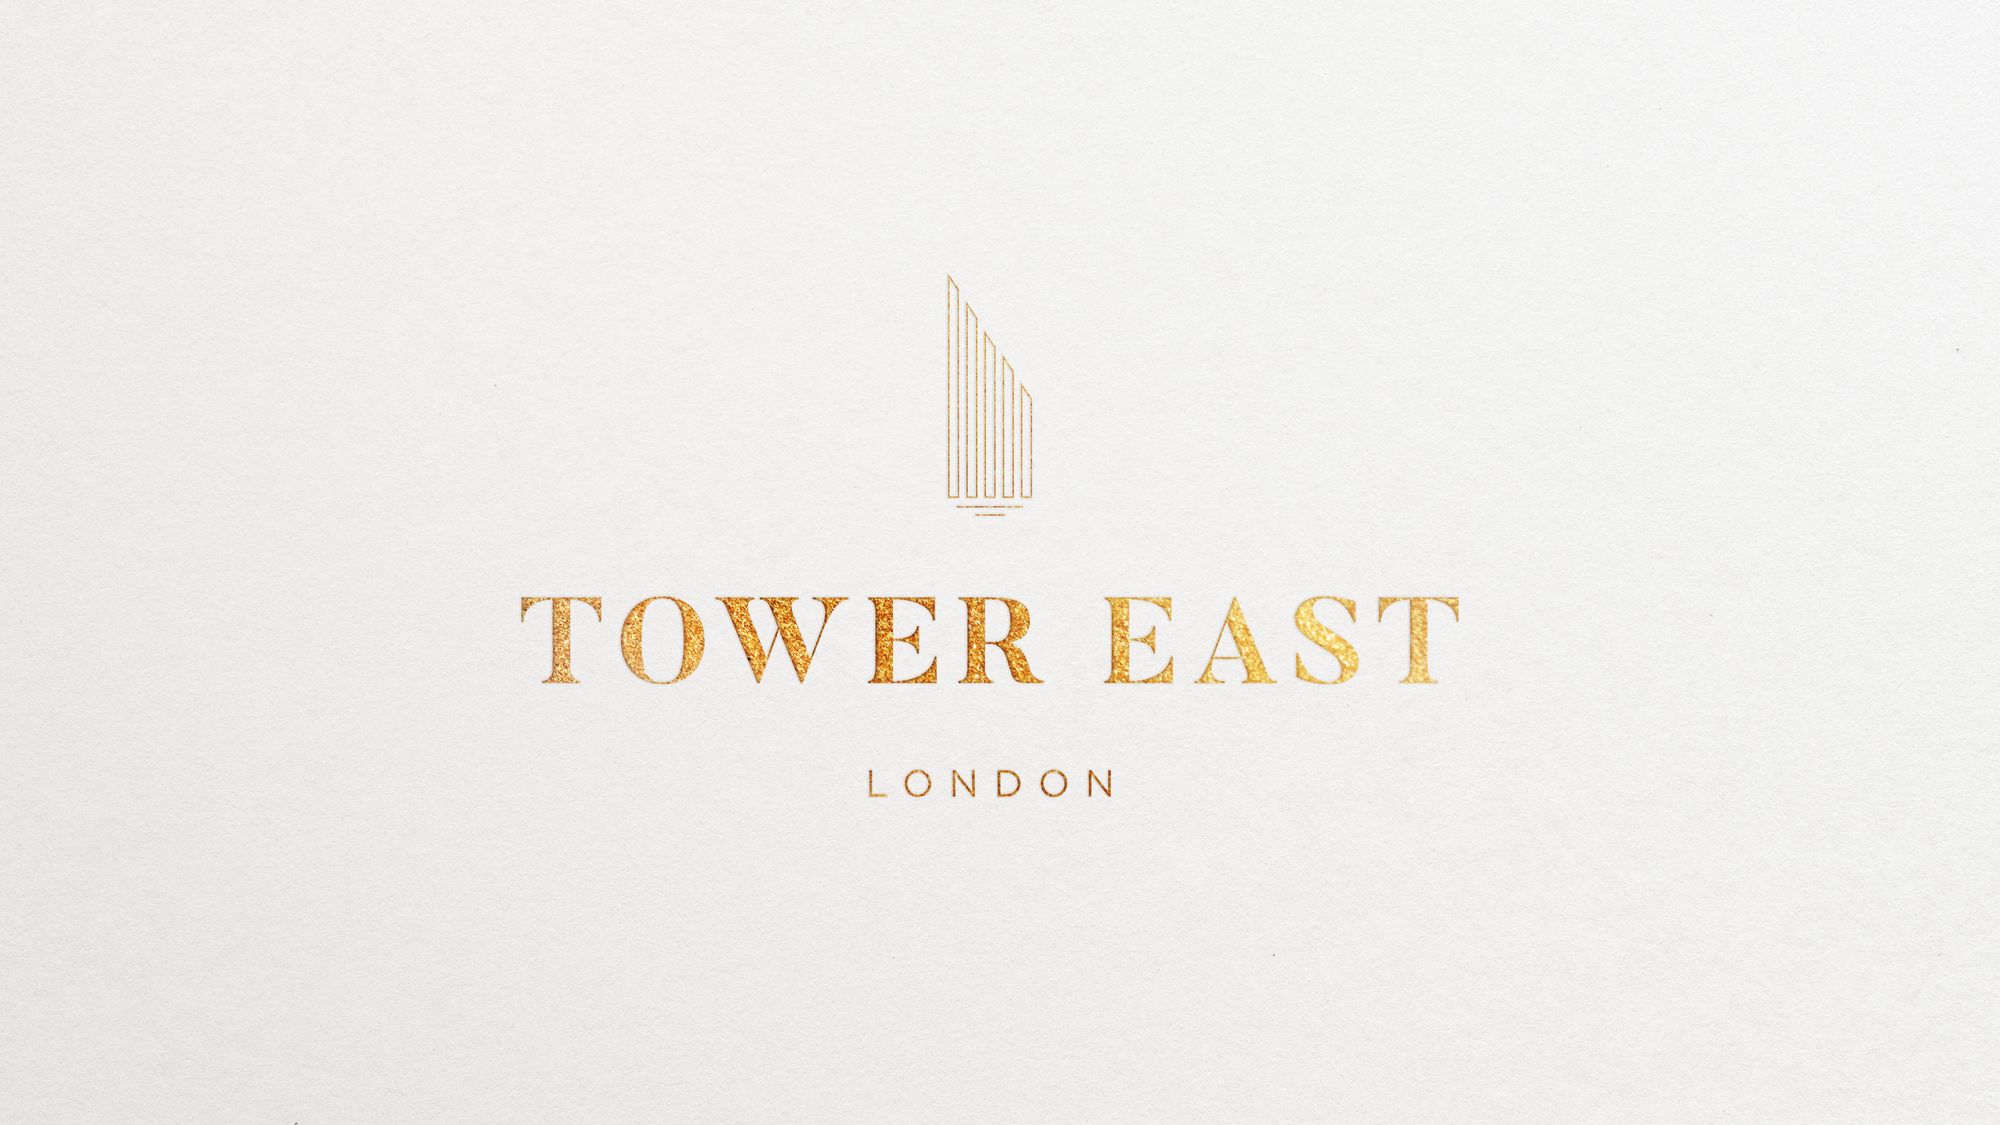 Tower East